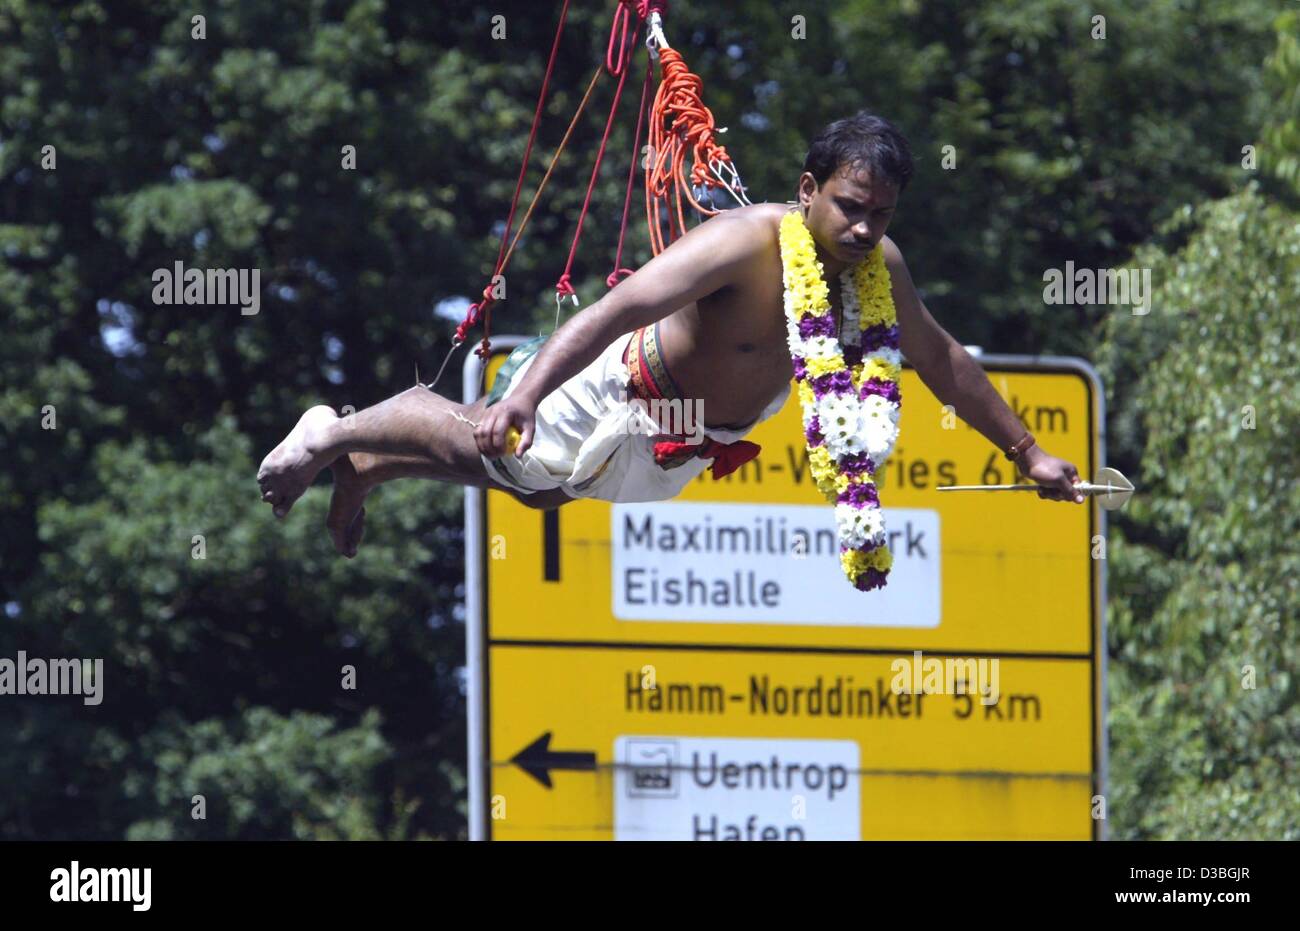 (dpa) - A believer of the Hindu faith hangs, attached to hooks which a pierced through the skin on his legs and back, on ropes and hovers in front of a yellow road sign in Hamm, Germany, 15 June 2003. He is part of a Hindu temple congregation which celebrates the goddess Sri Kamadchi Ampal (the godd Stock Photo